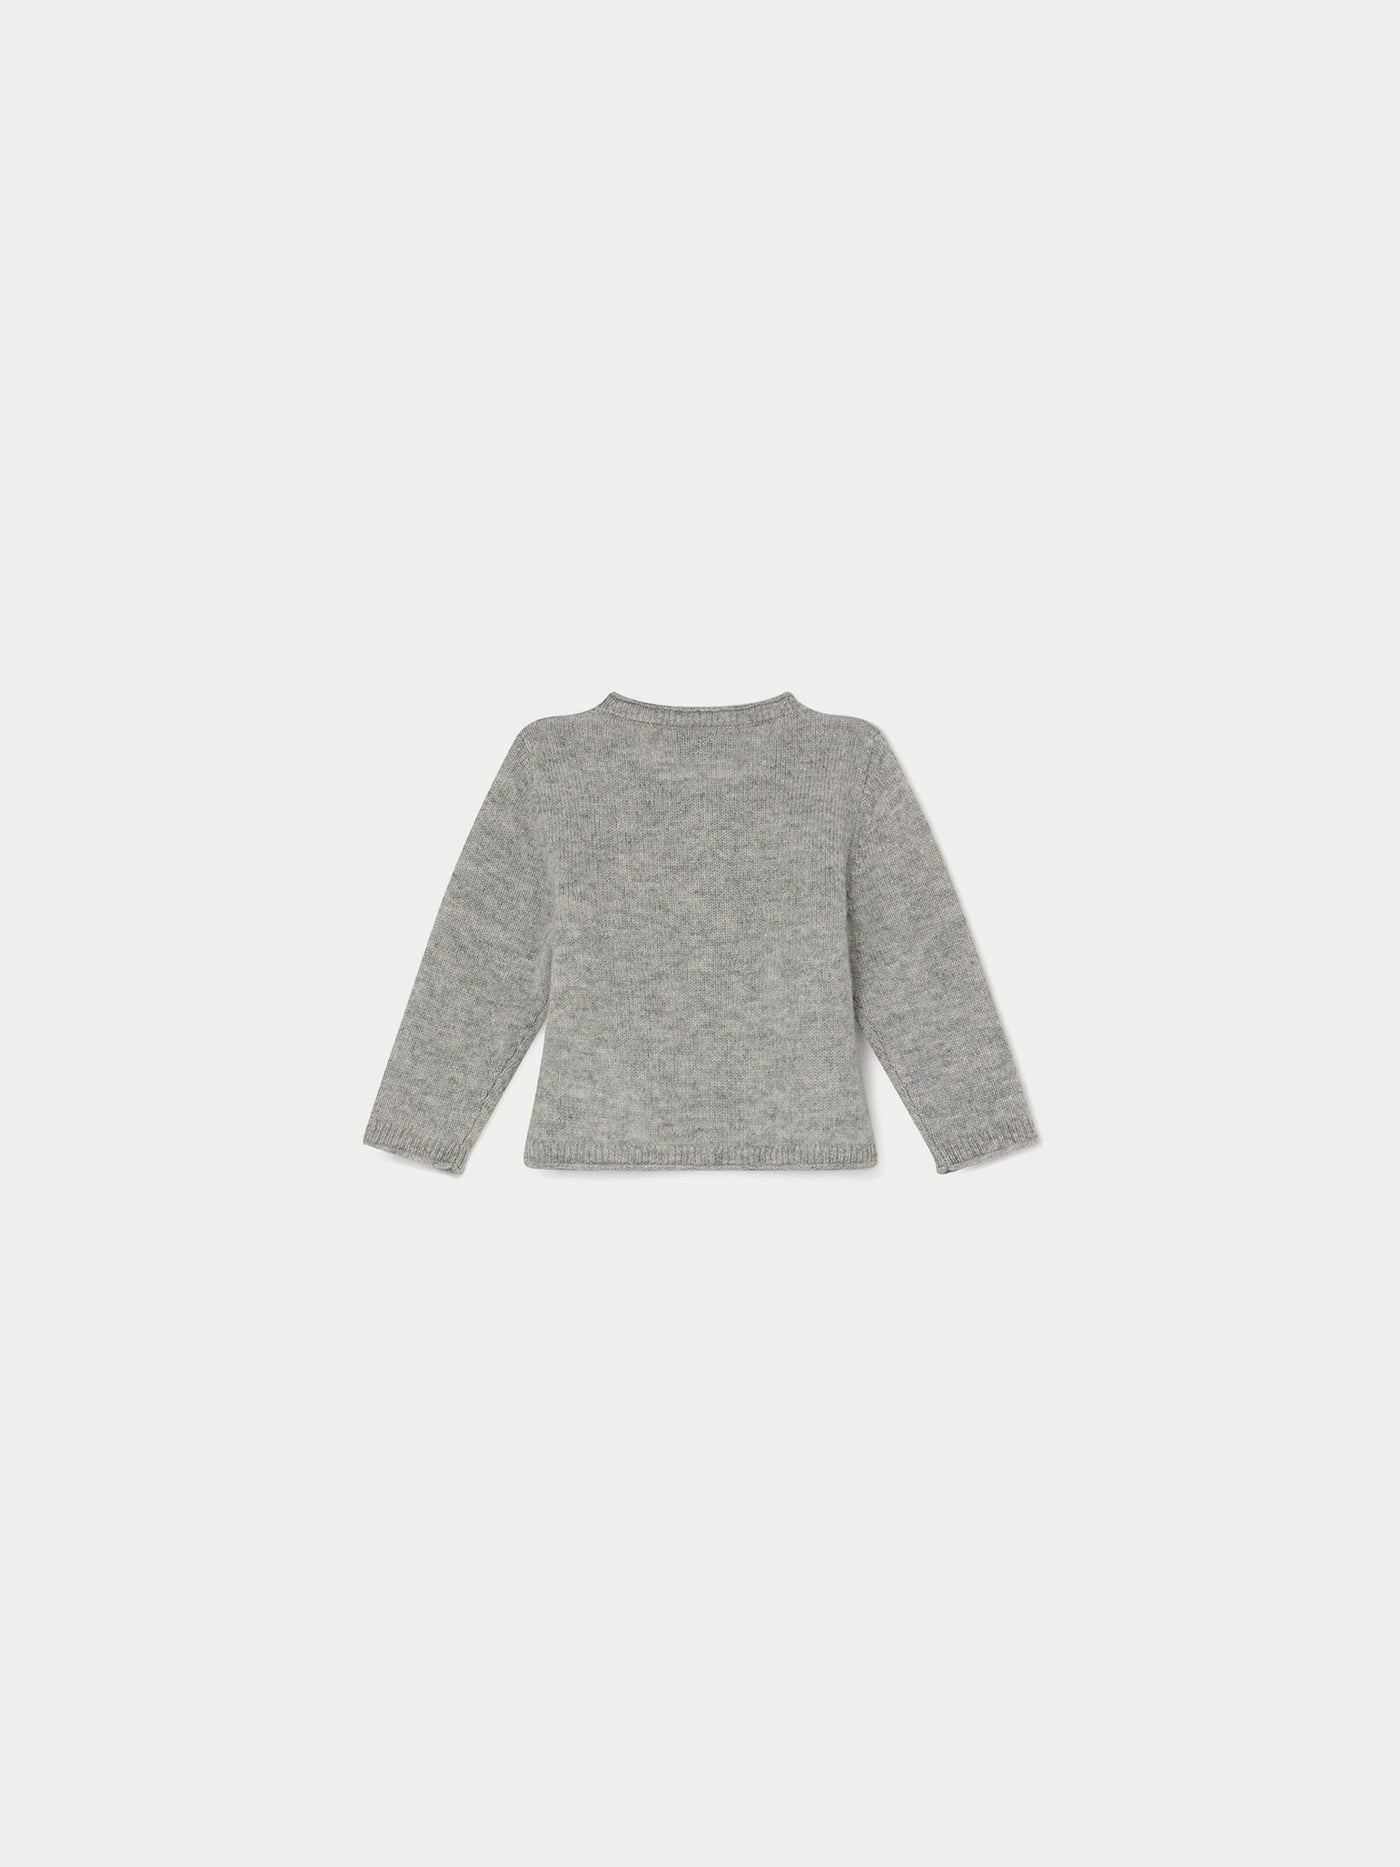 Cashmere Cardigan for Baby heathered gray